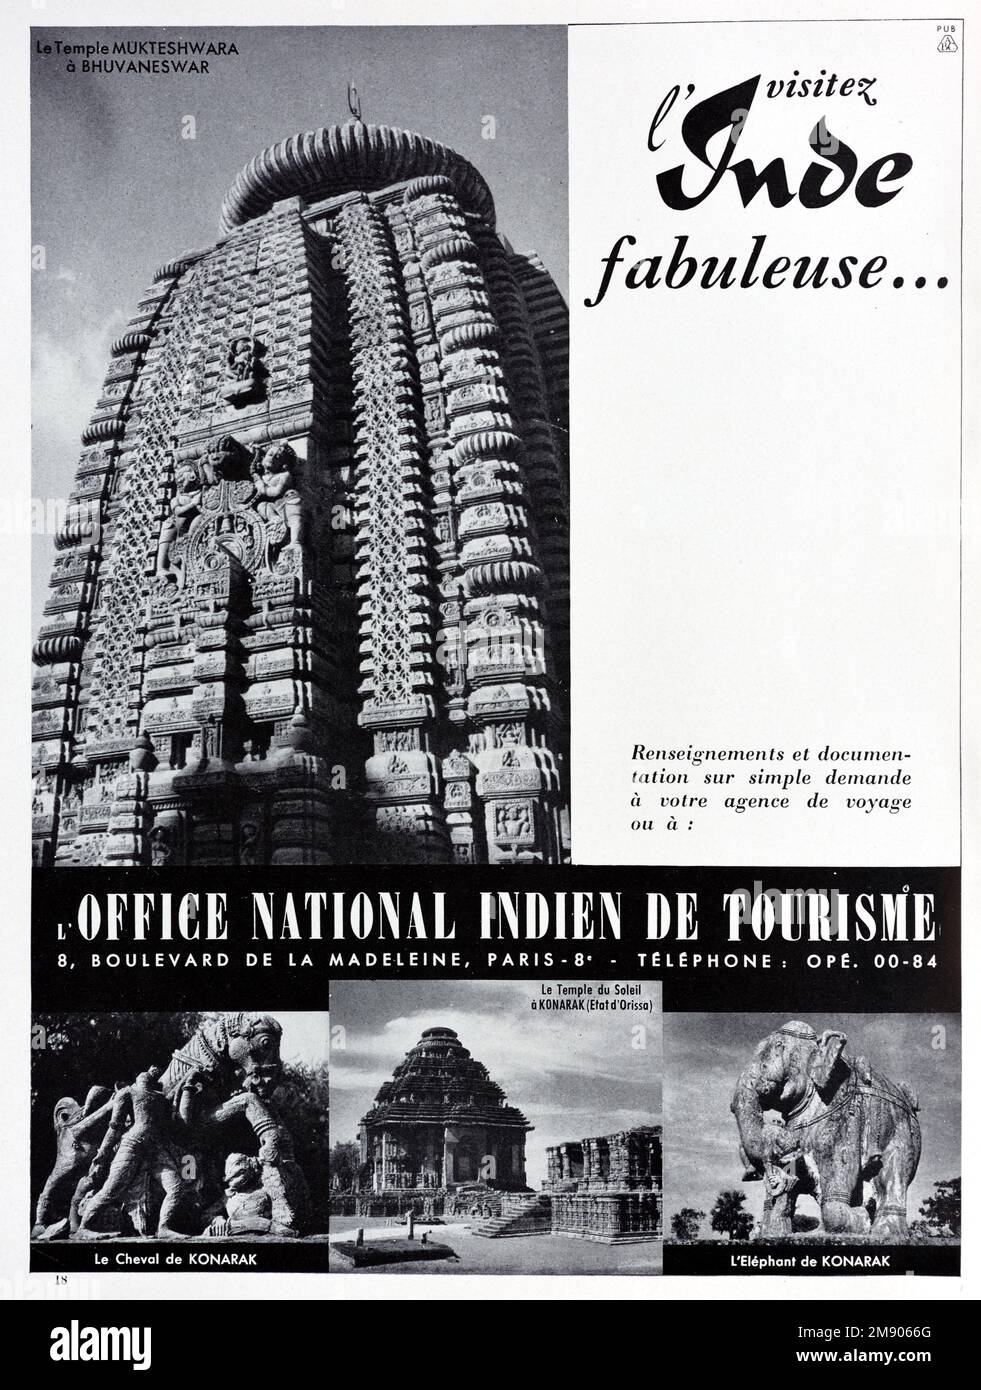 Vintage or Old Advert, Advertisement, Publicity or Illustration for Tourism in India Advert 1956. Illustrated with Muktesvara Temple at Bhubaneswar, and Konark Sun Temple. Stock Photo